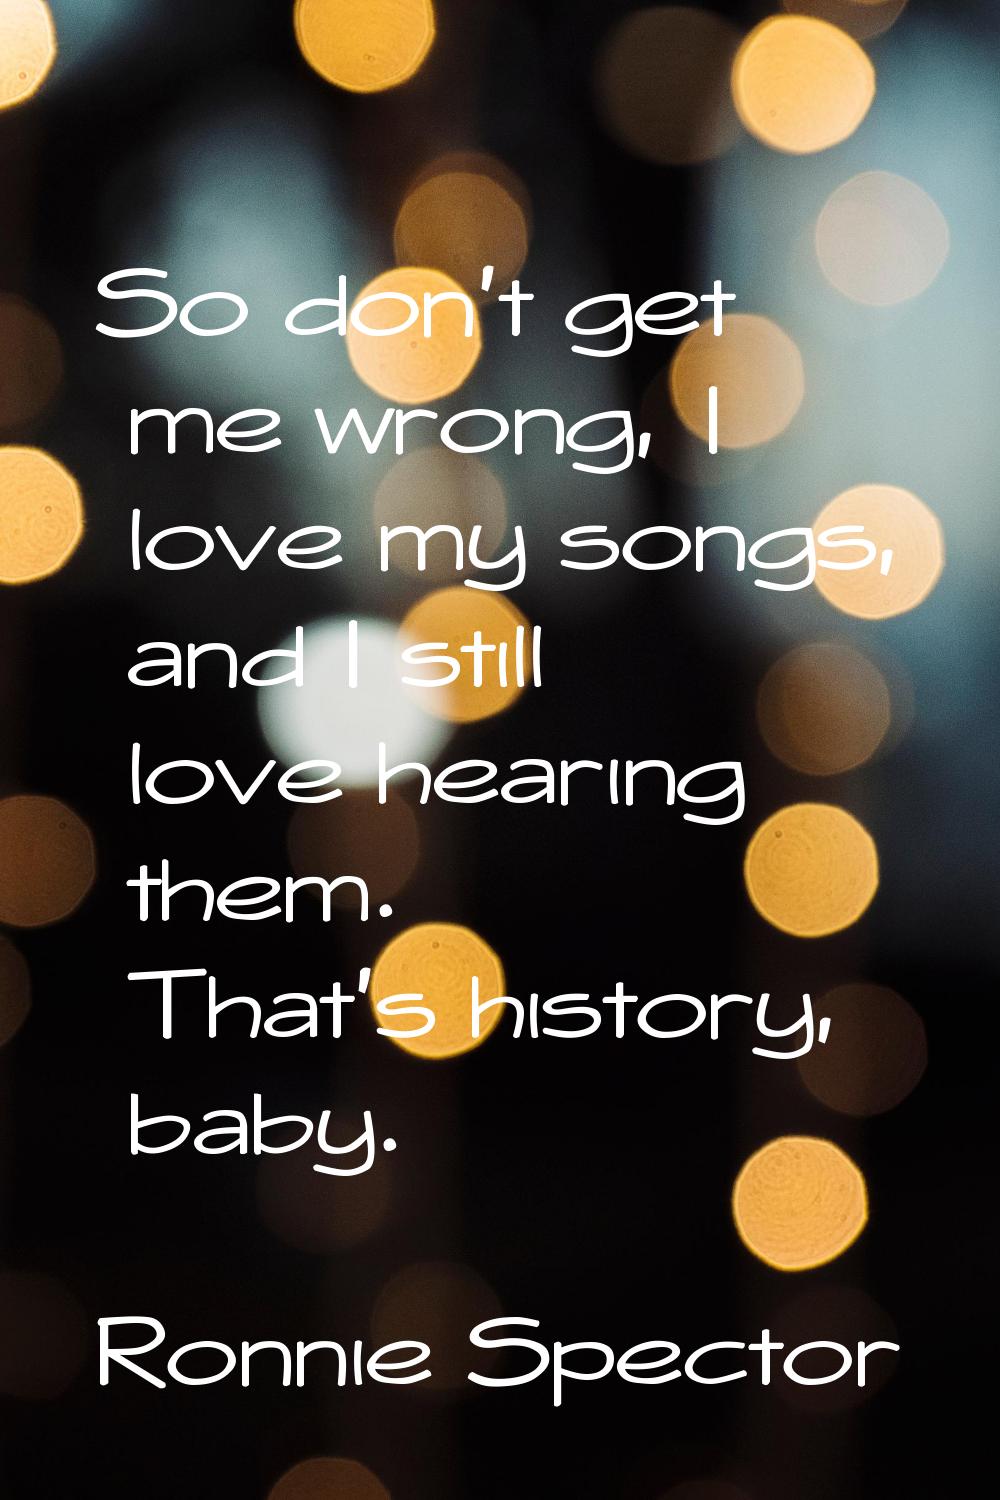 So don't get me wrong, I love my songs, and I still love hearing them. That's history, baby.